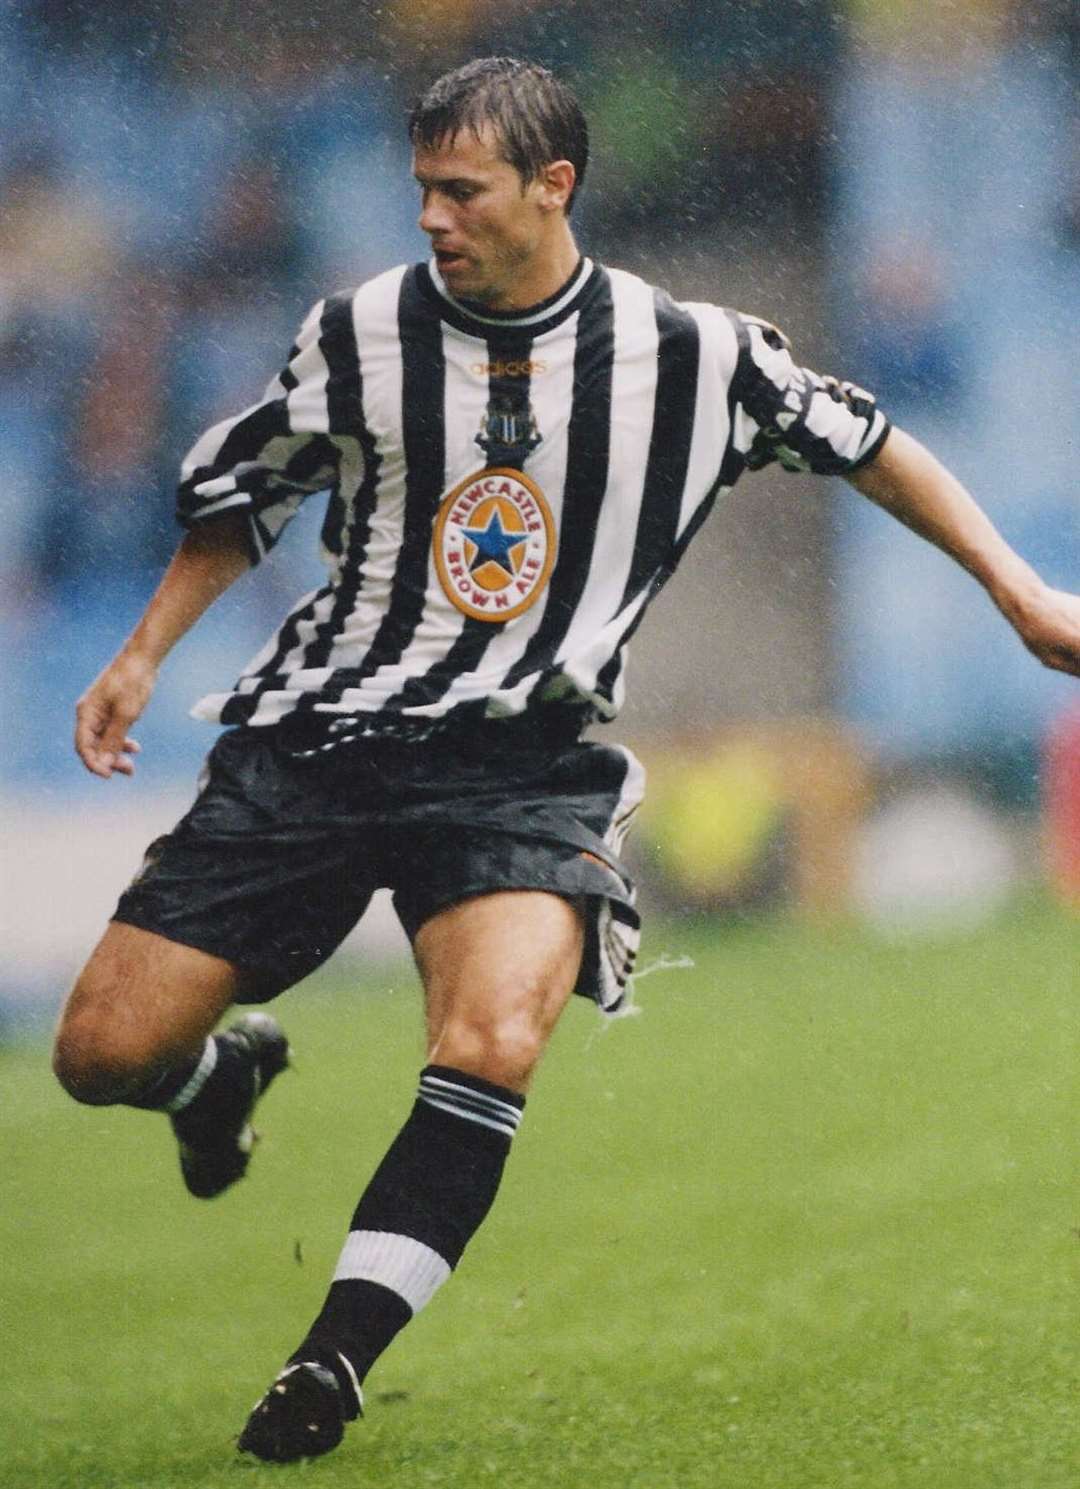 Olly Lee's father, Rob, played more than 300 games for Newcastle